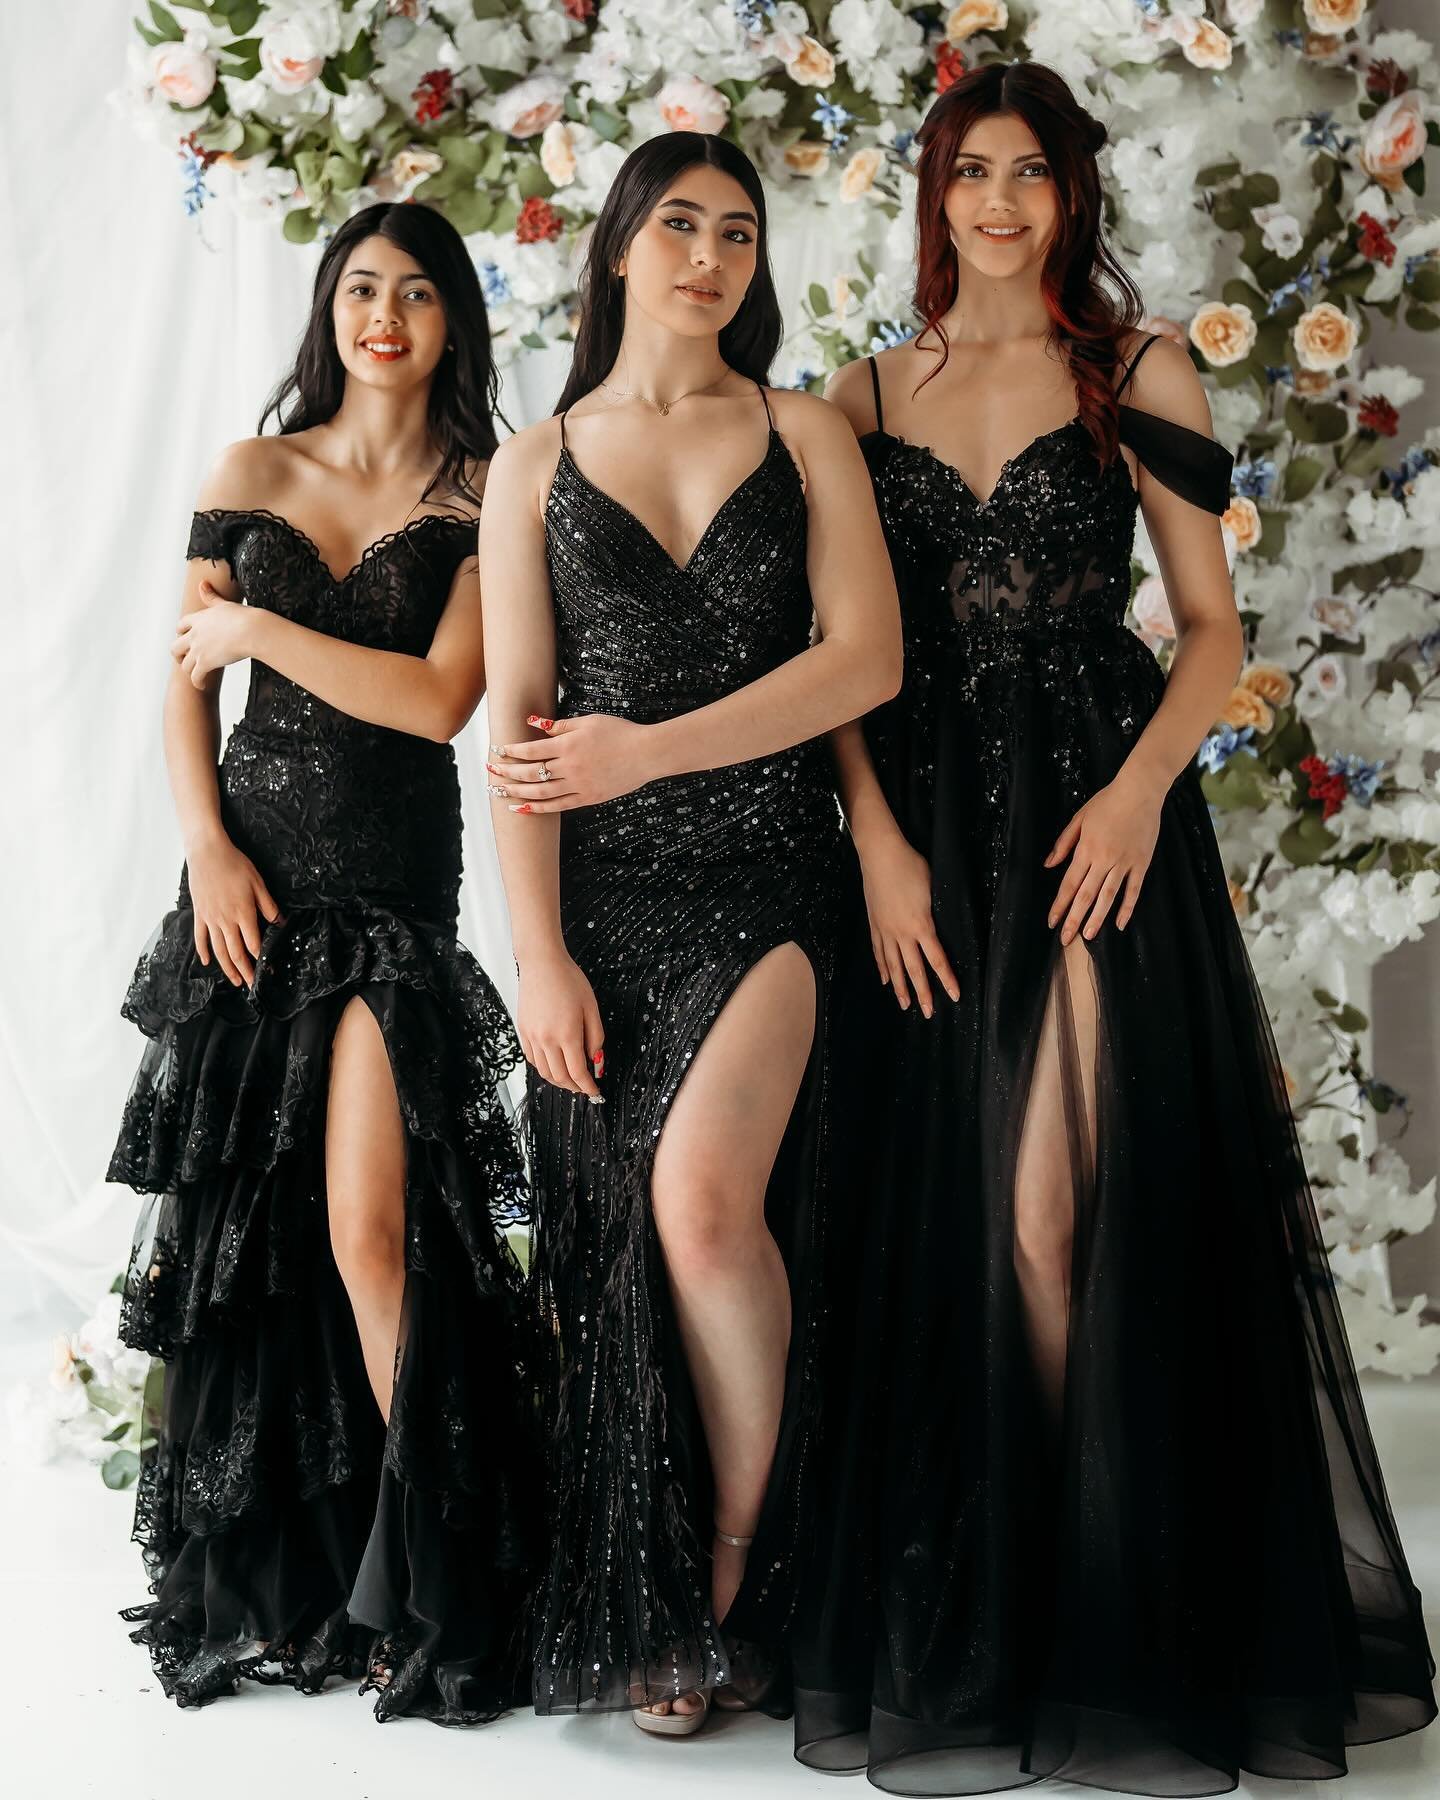 This dresses are exactly what you been dreaming of for #PROM 🖤✨
.
#prom2024 #promqueen #promglam #promszn #prom24 #springformal #formal #oregon #pdx #pnw #shoplocal #sayyestothedress